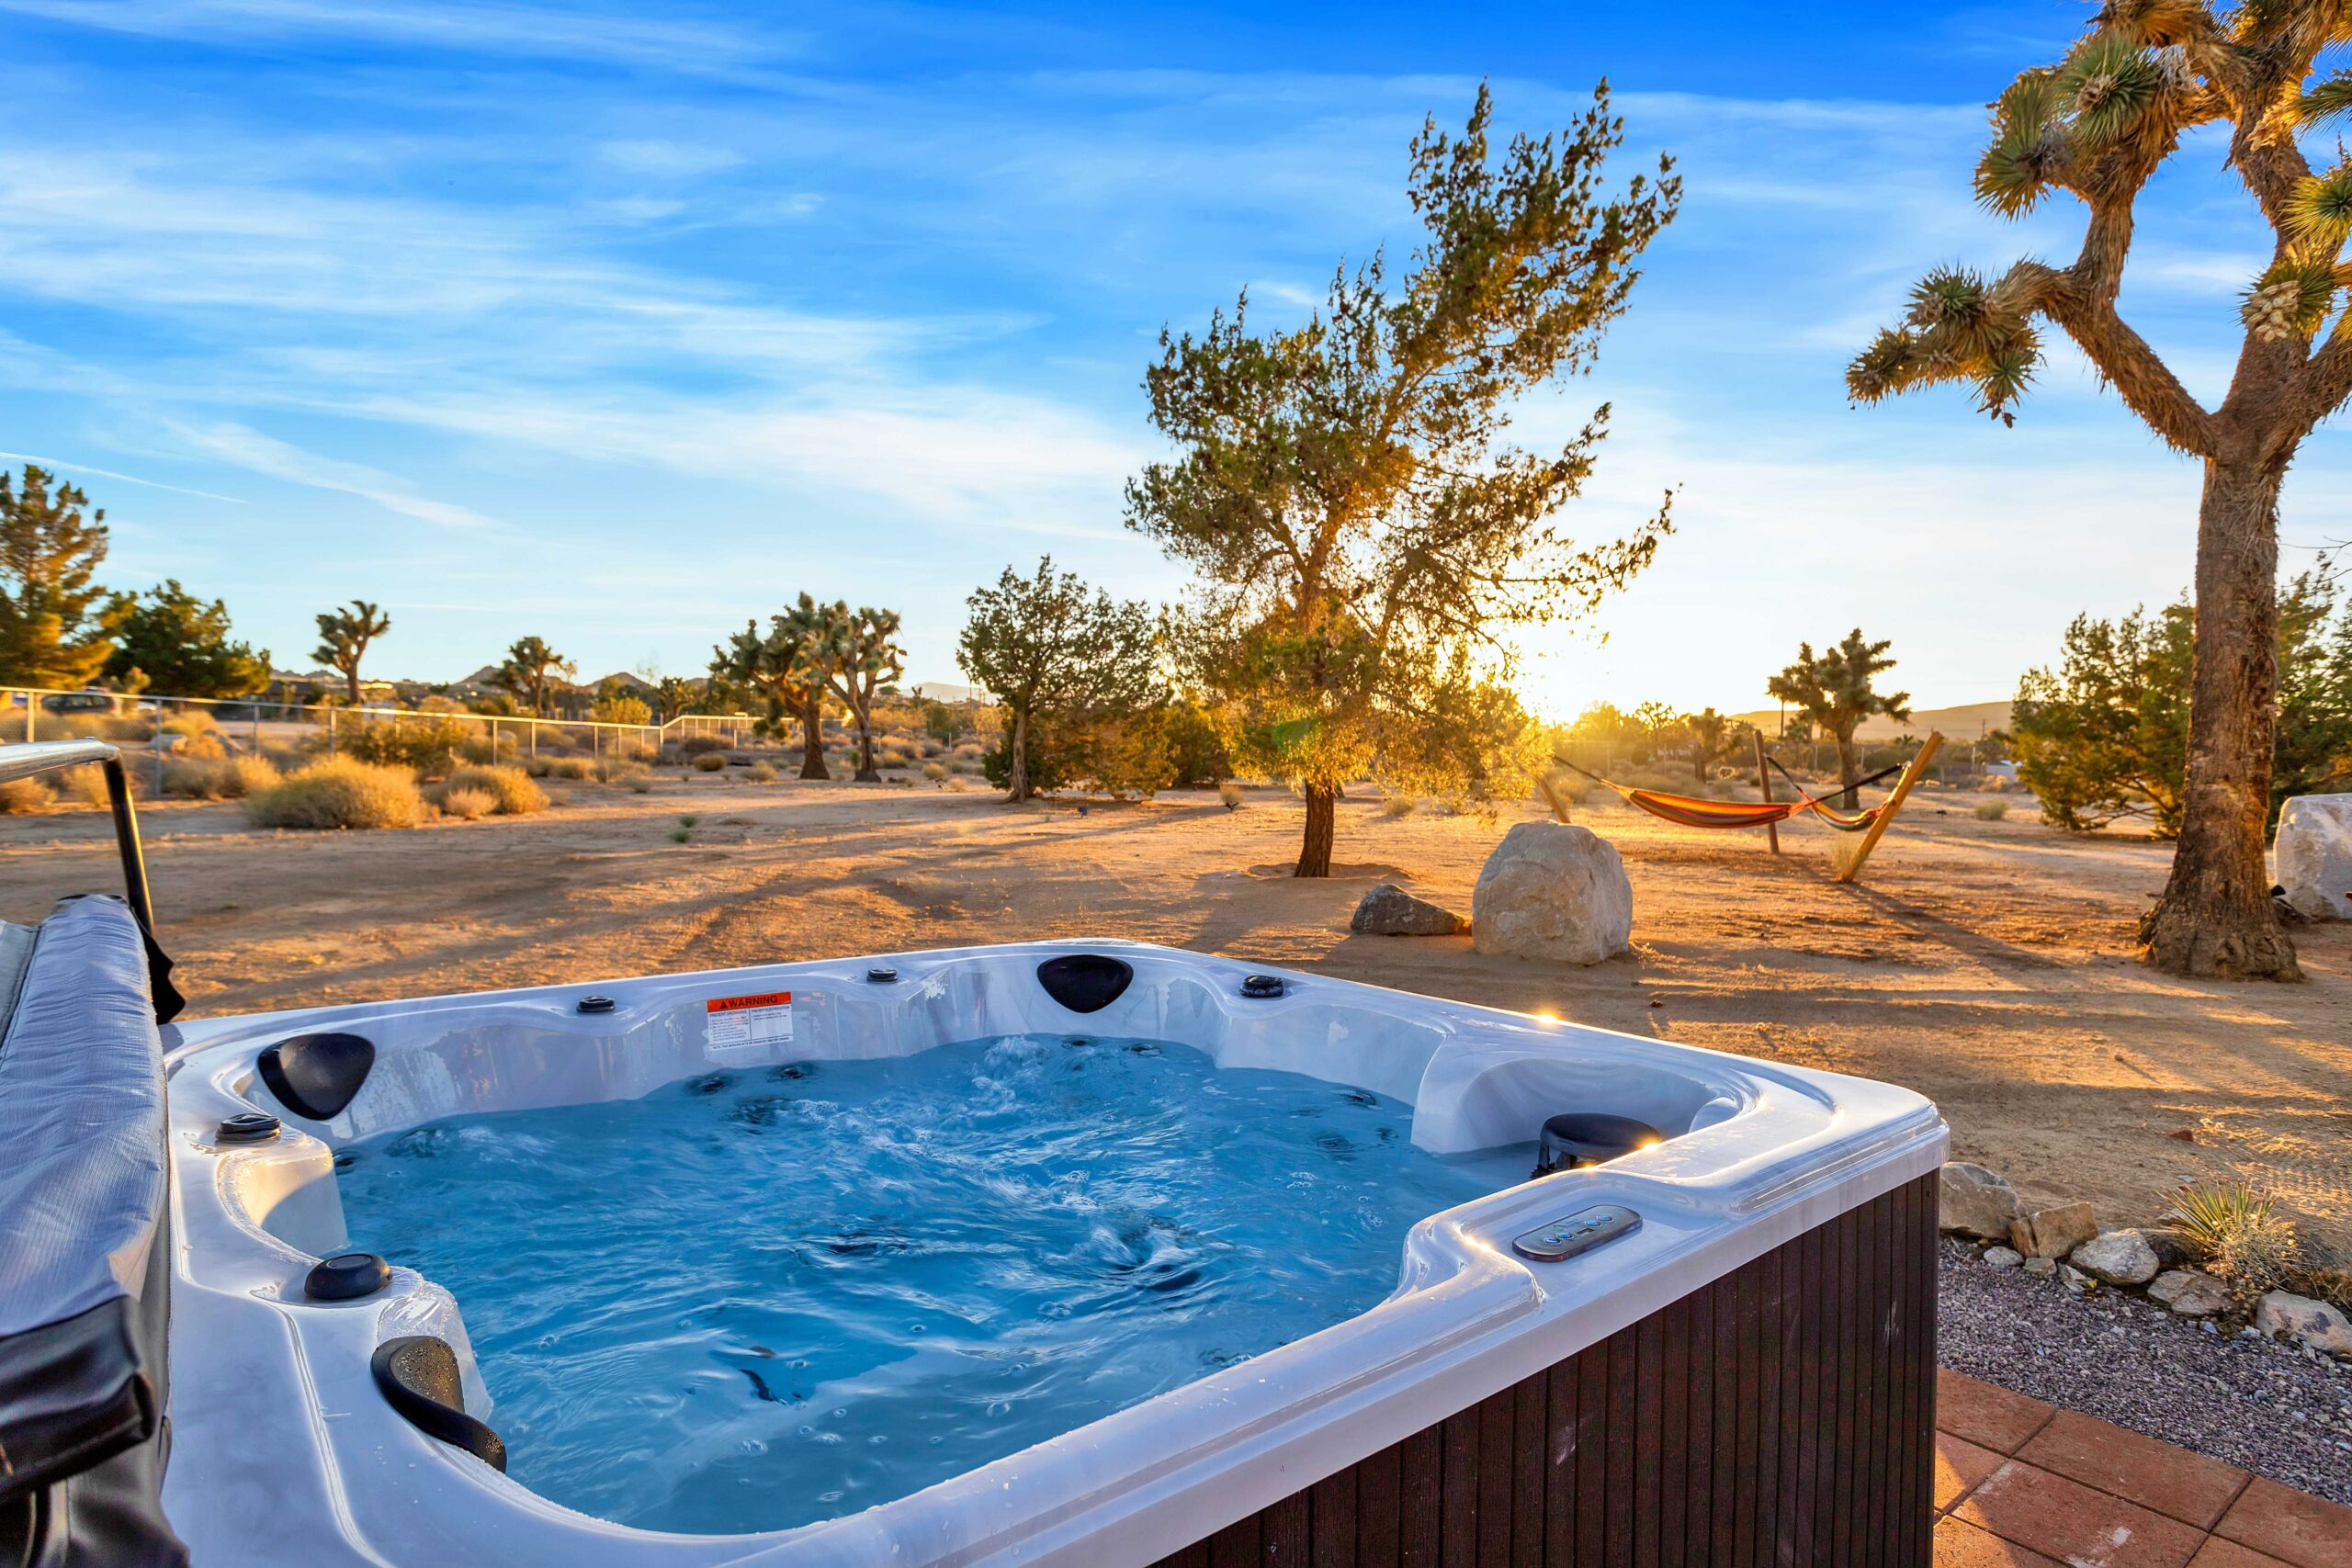 Hot tub in the backyard of a desert home at sunset